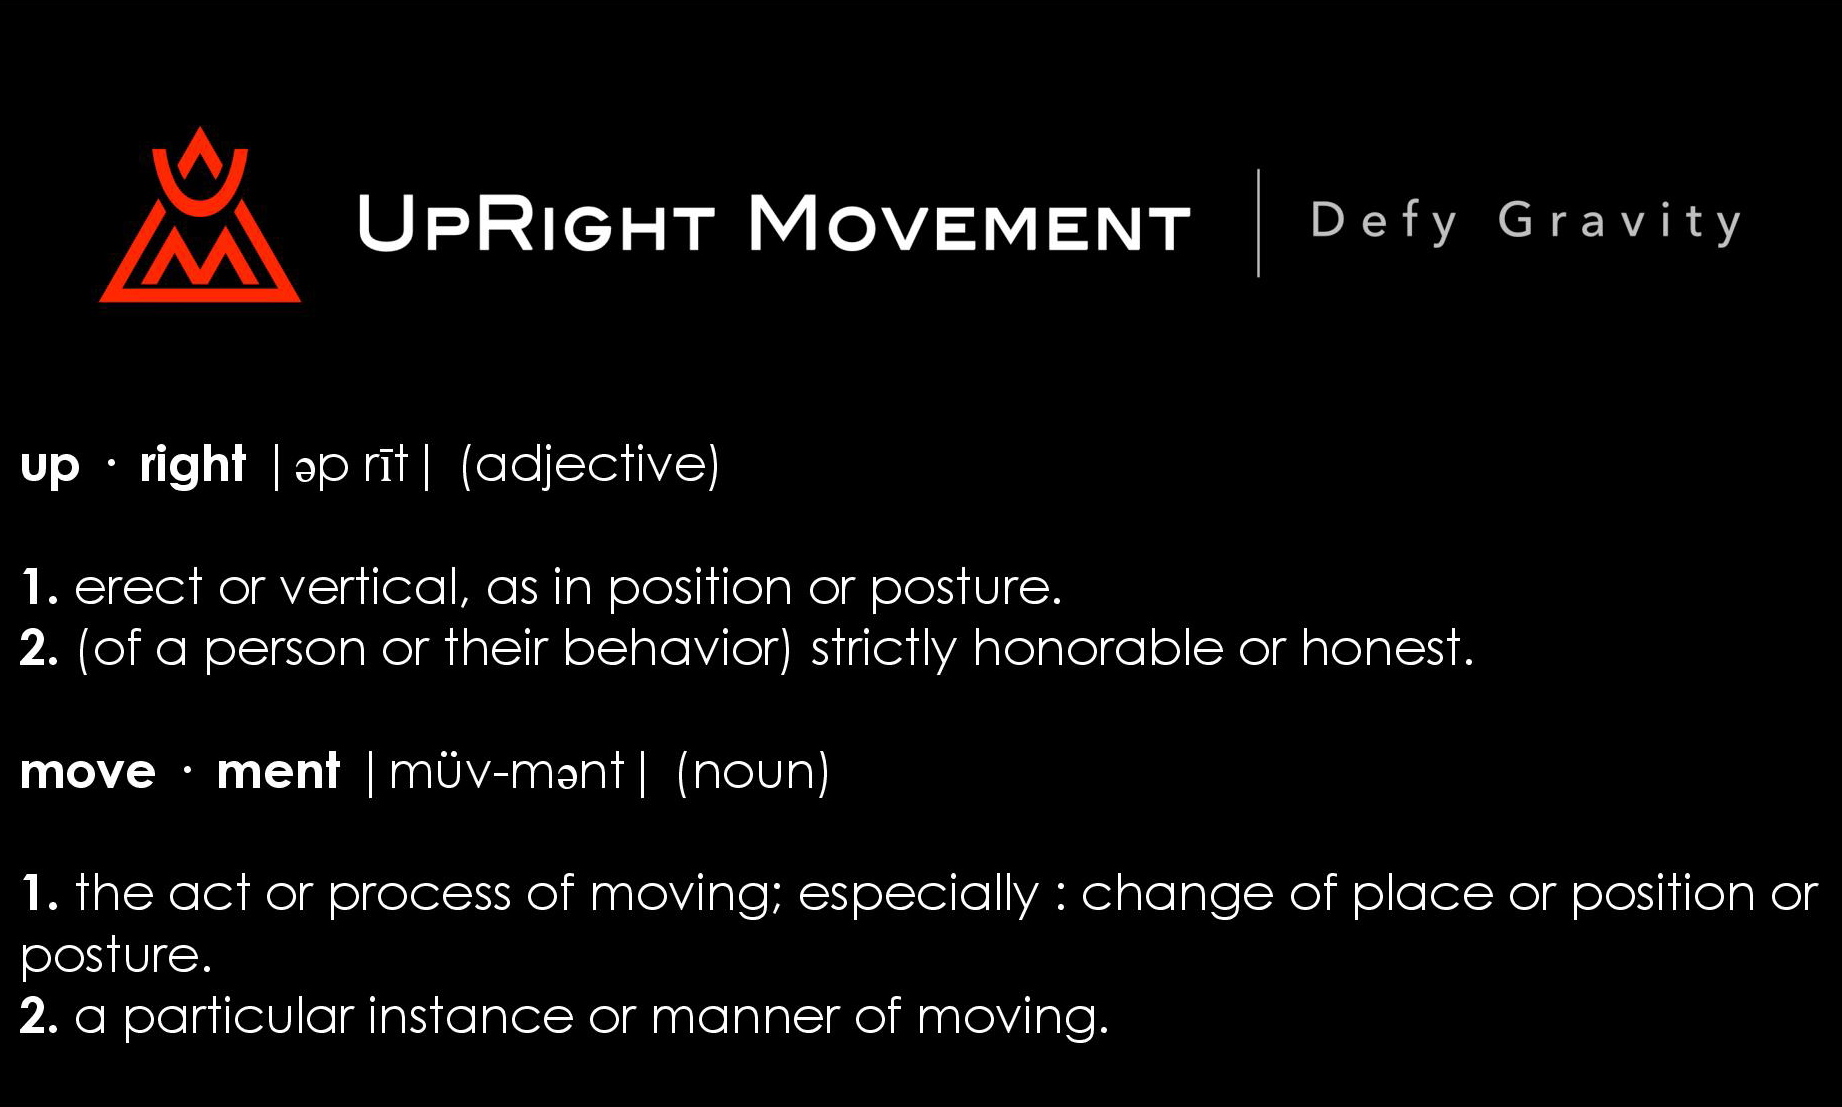 The Why, How, and What of UpRight Movement